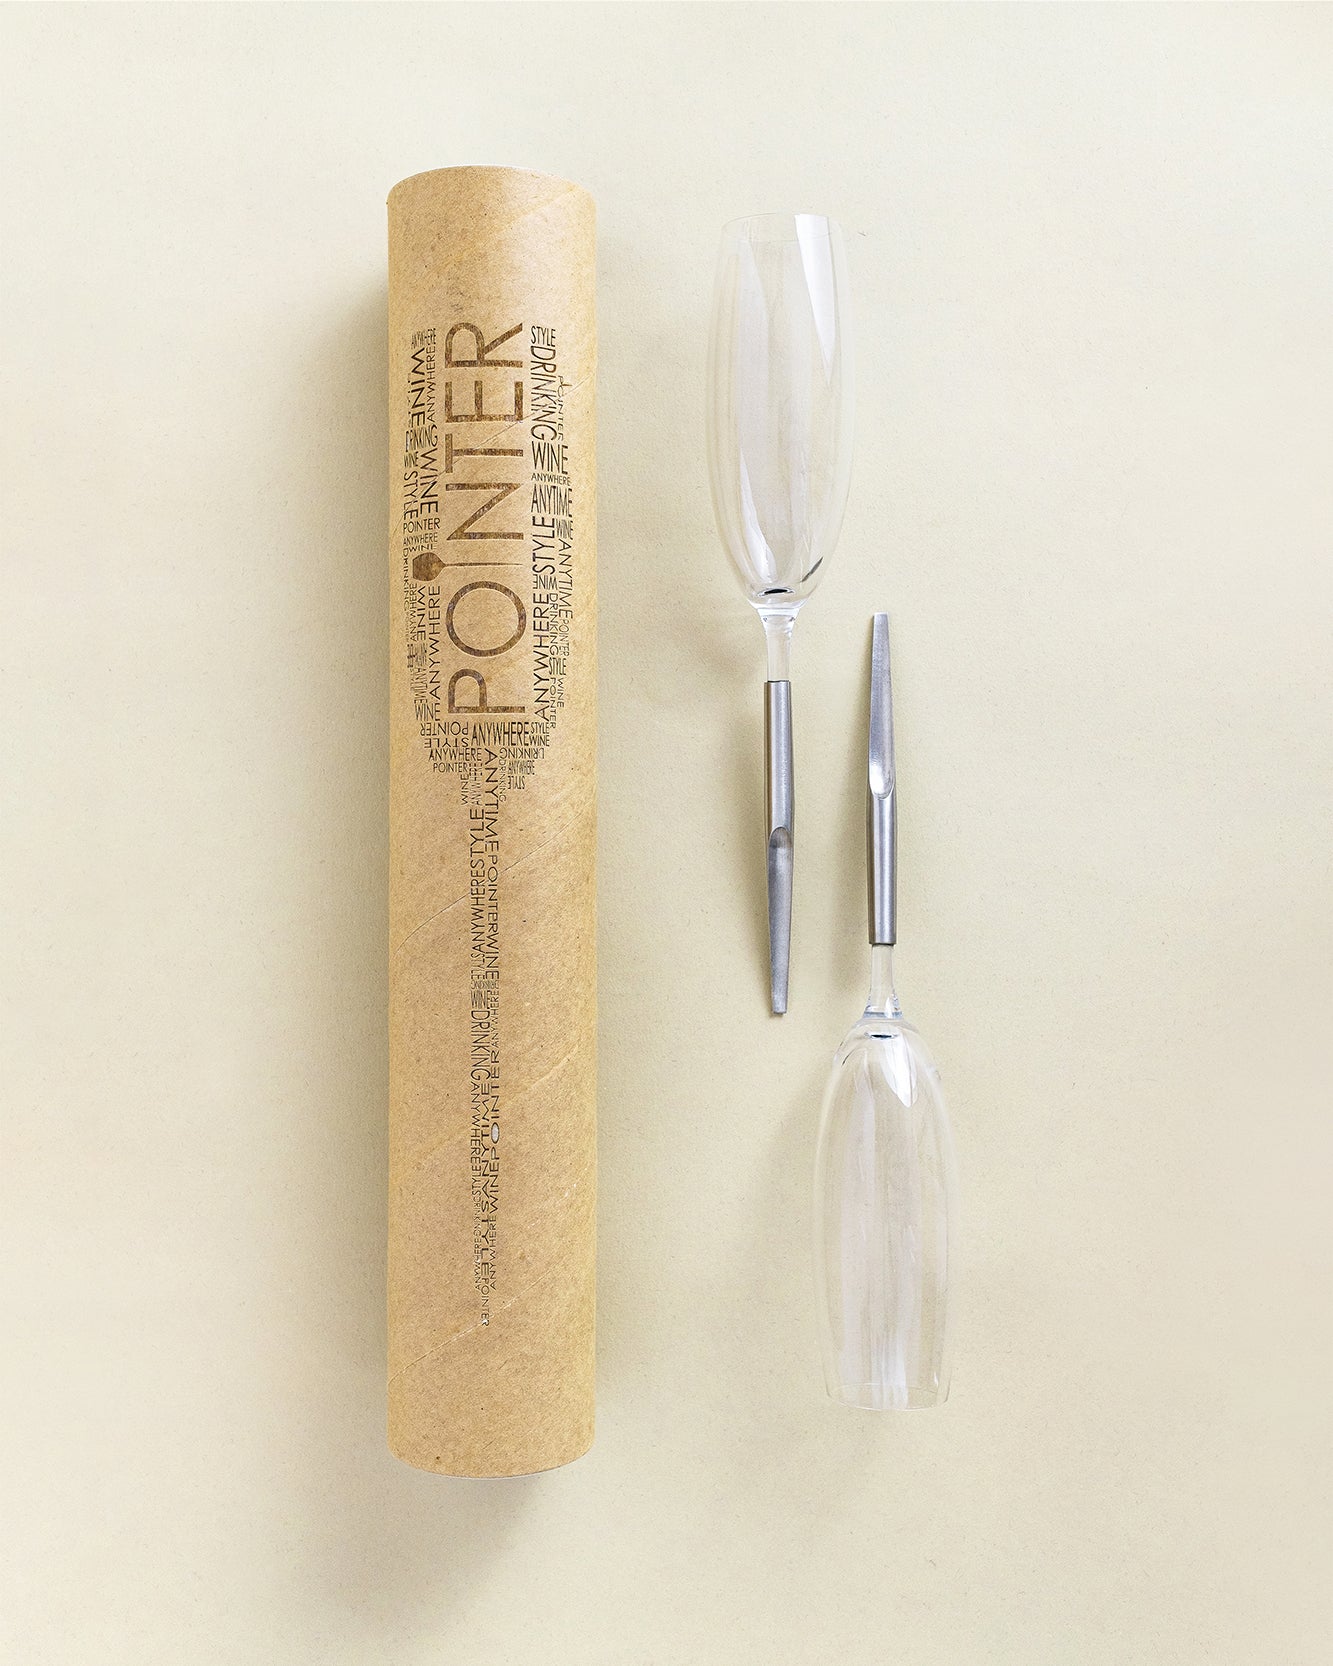 2 Pointer Crystal Champagne Glasses with metal Pin, laying parallel next to cardboard packaging